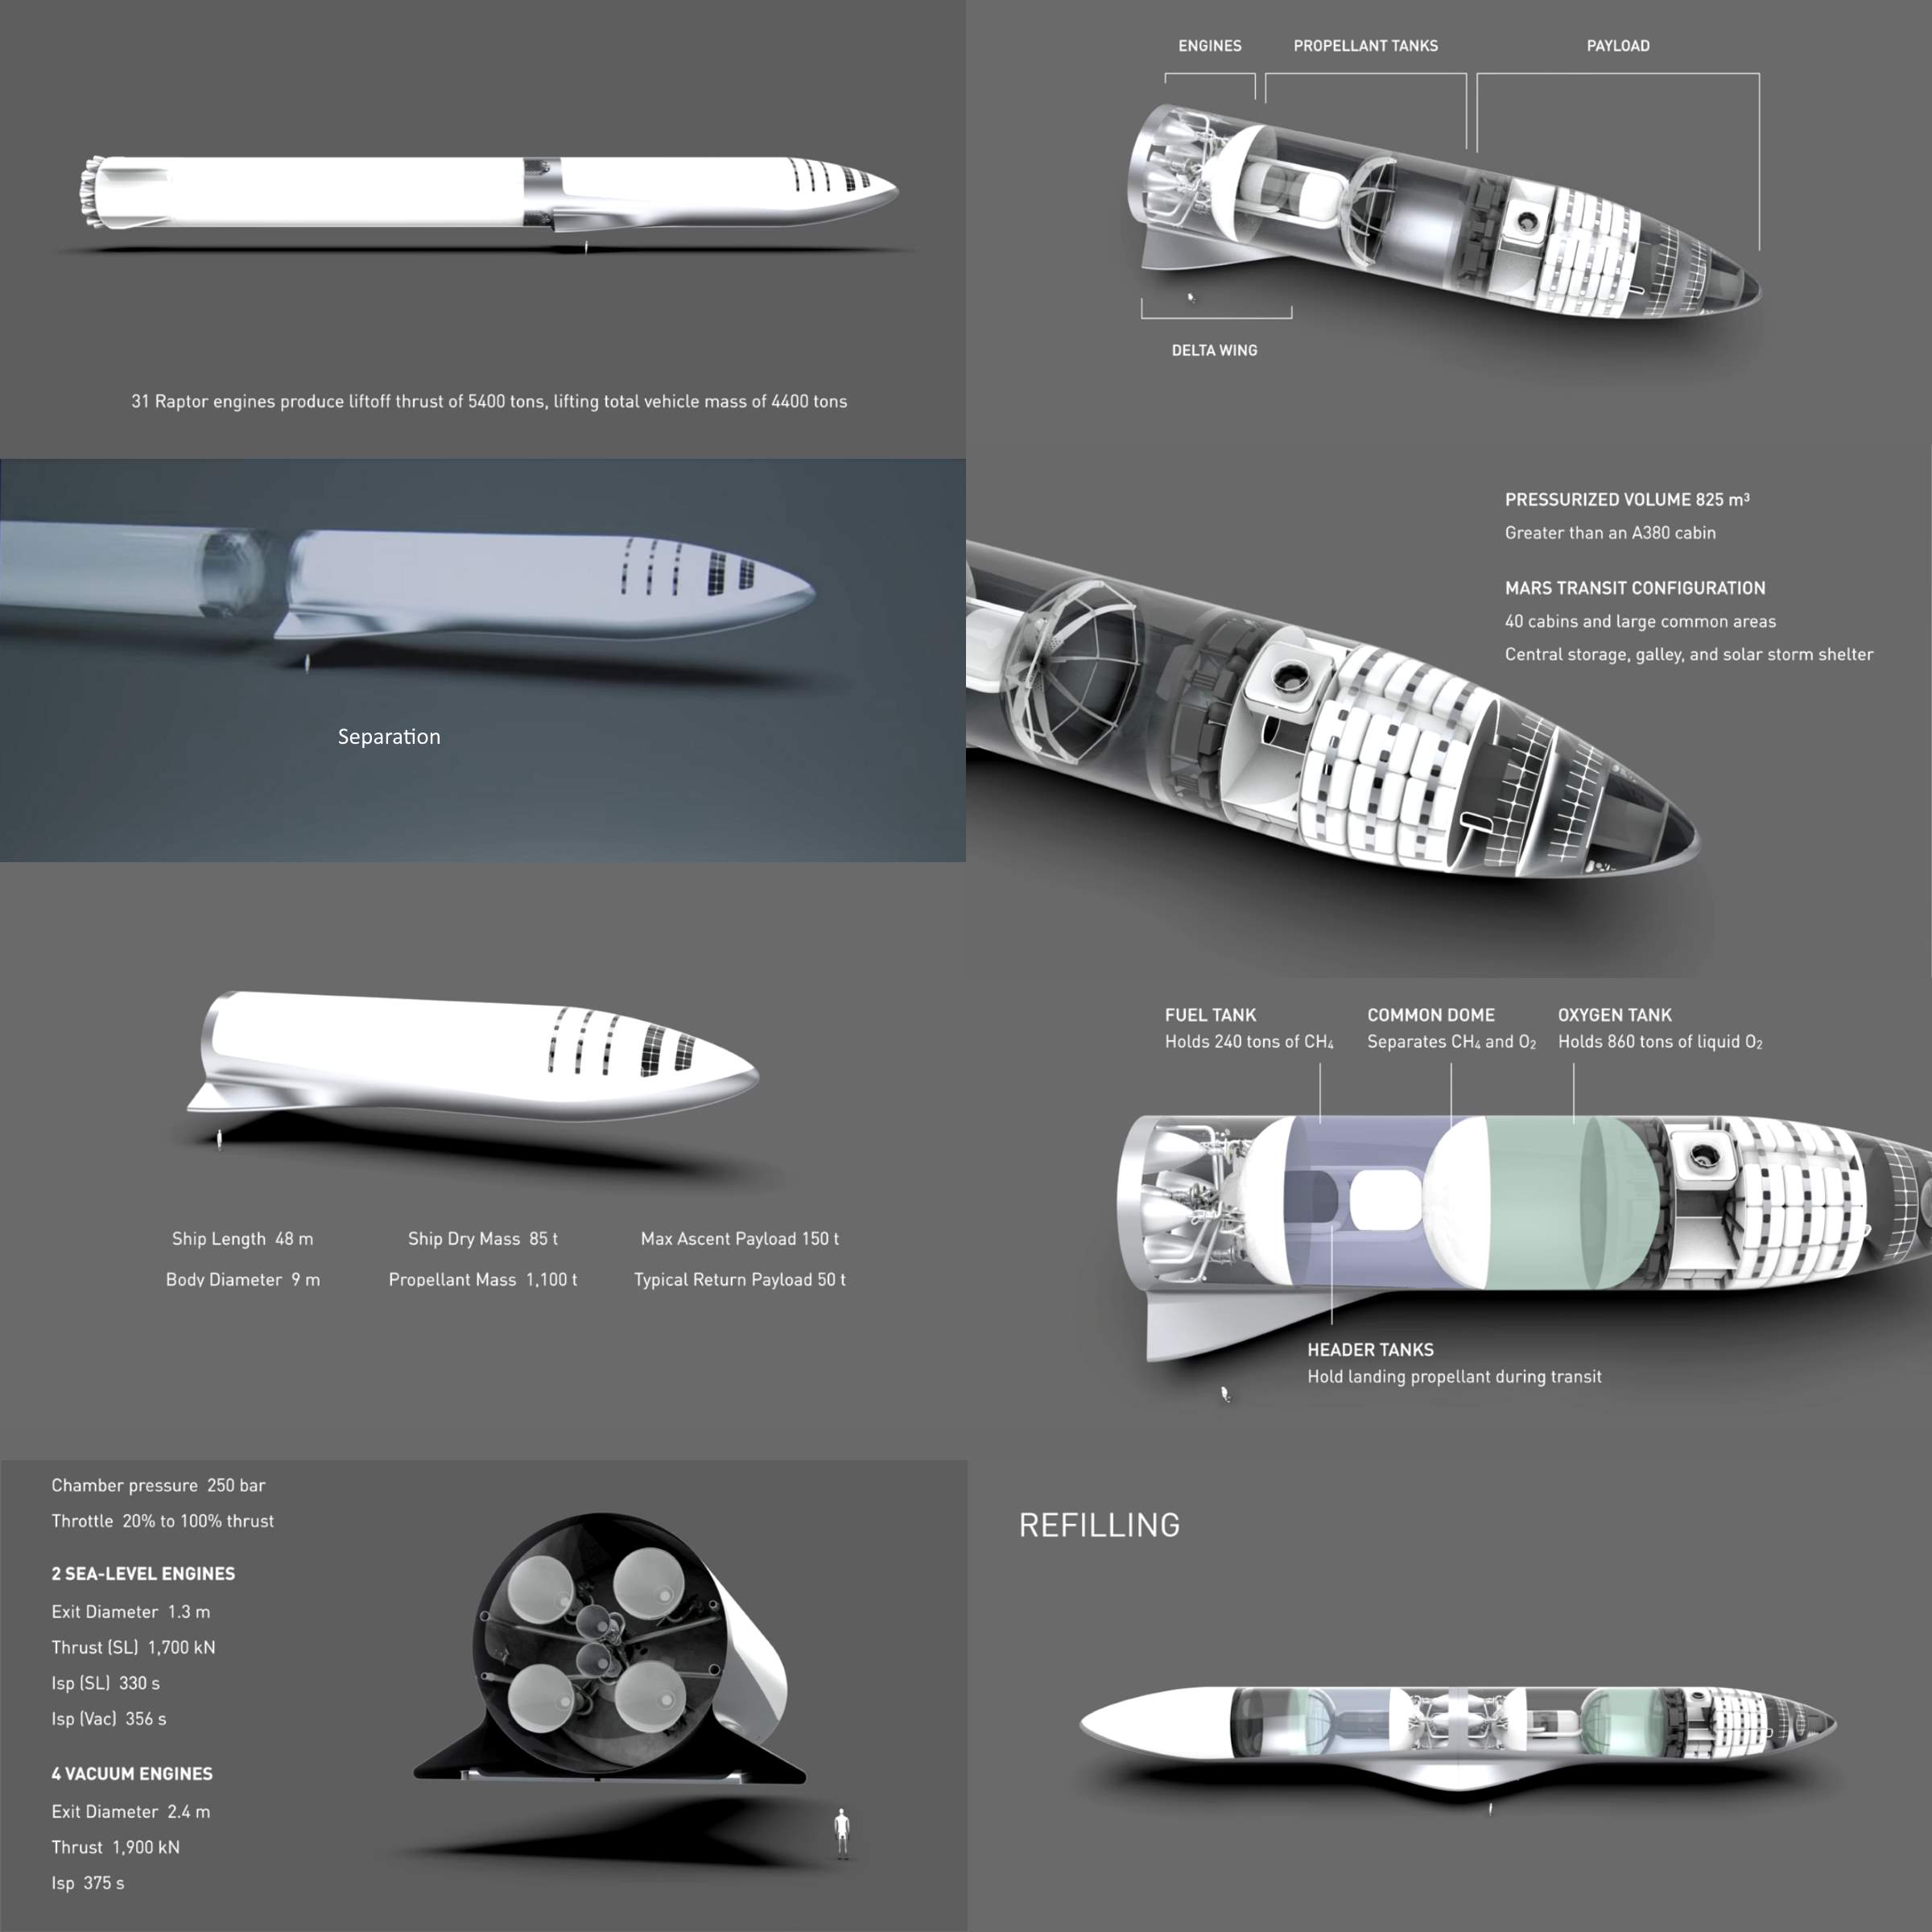 Making life multiplanetary: SpaceX BFS details